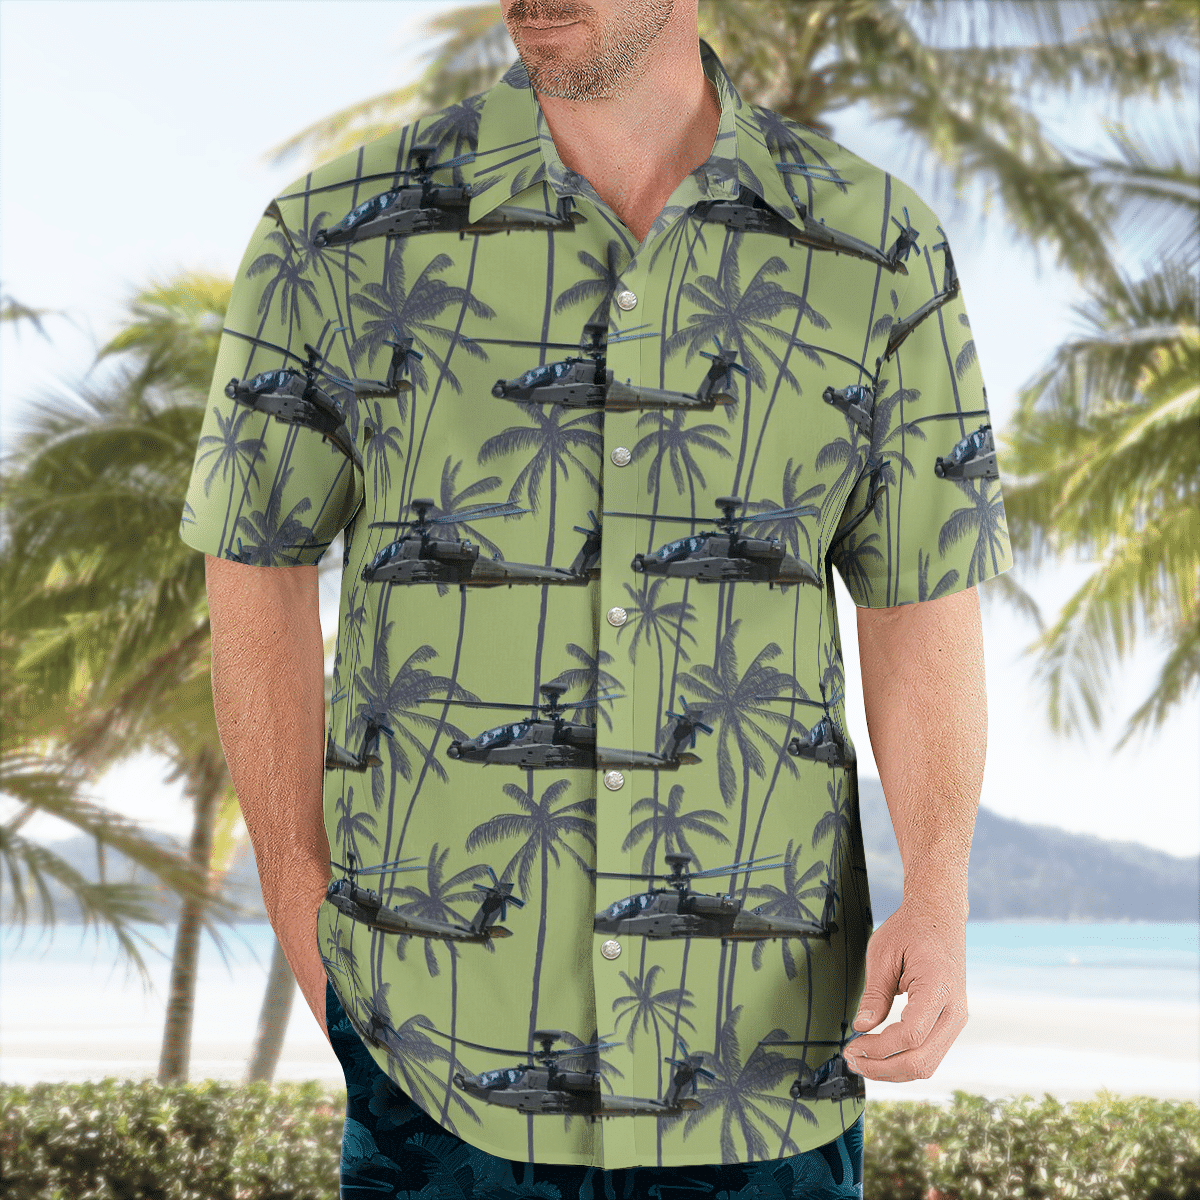 Top Hawaiian fashions that will give you a good look 178